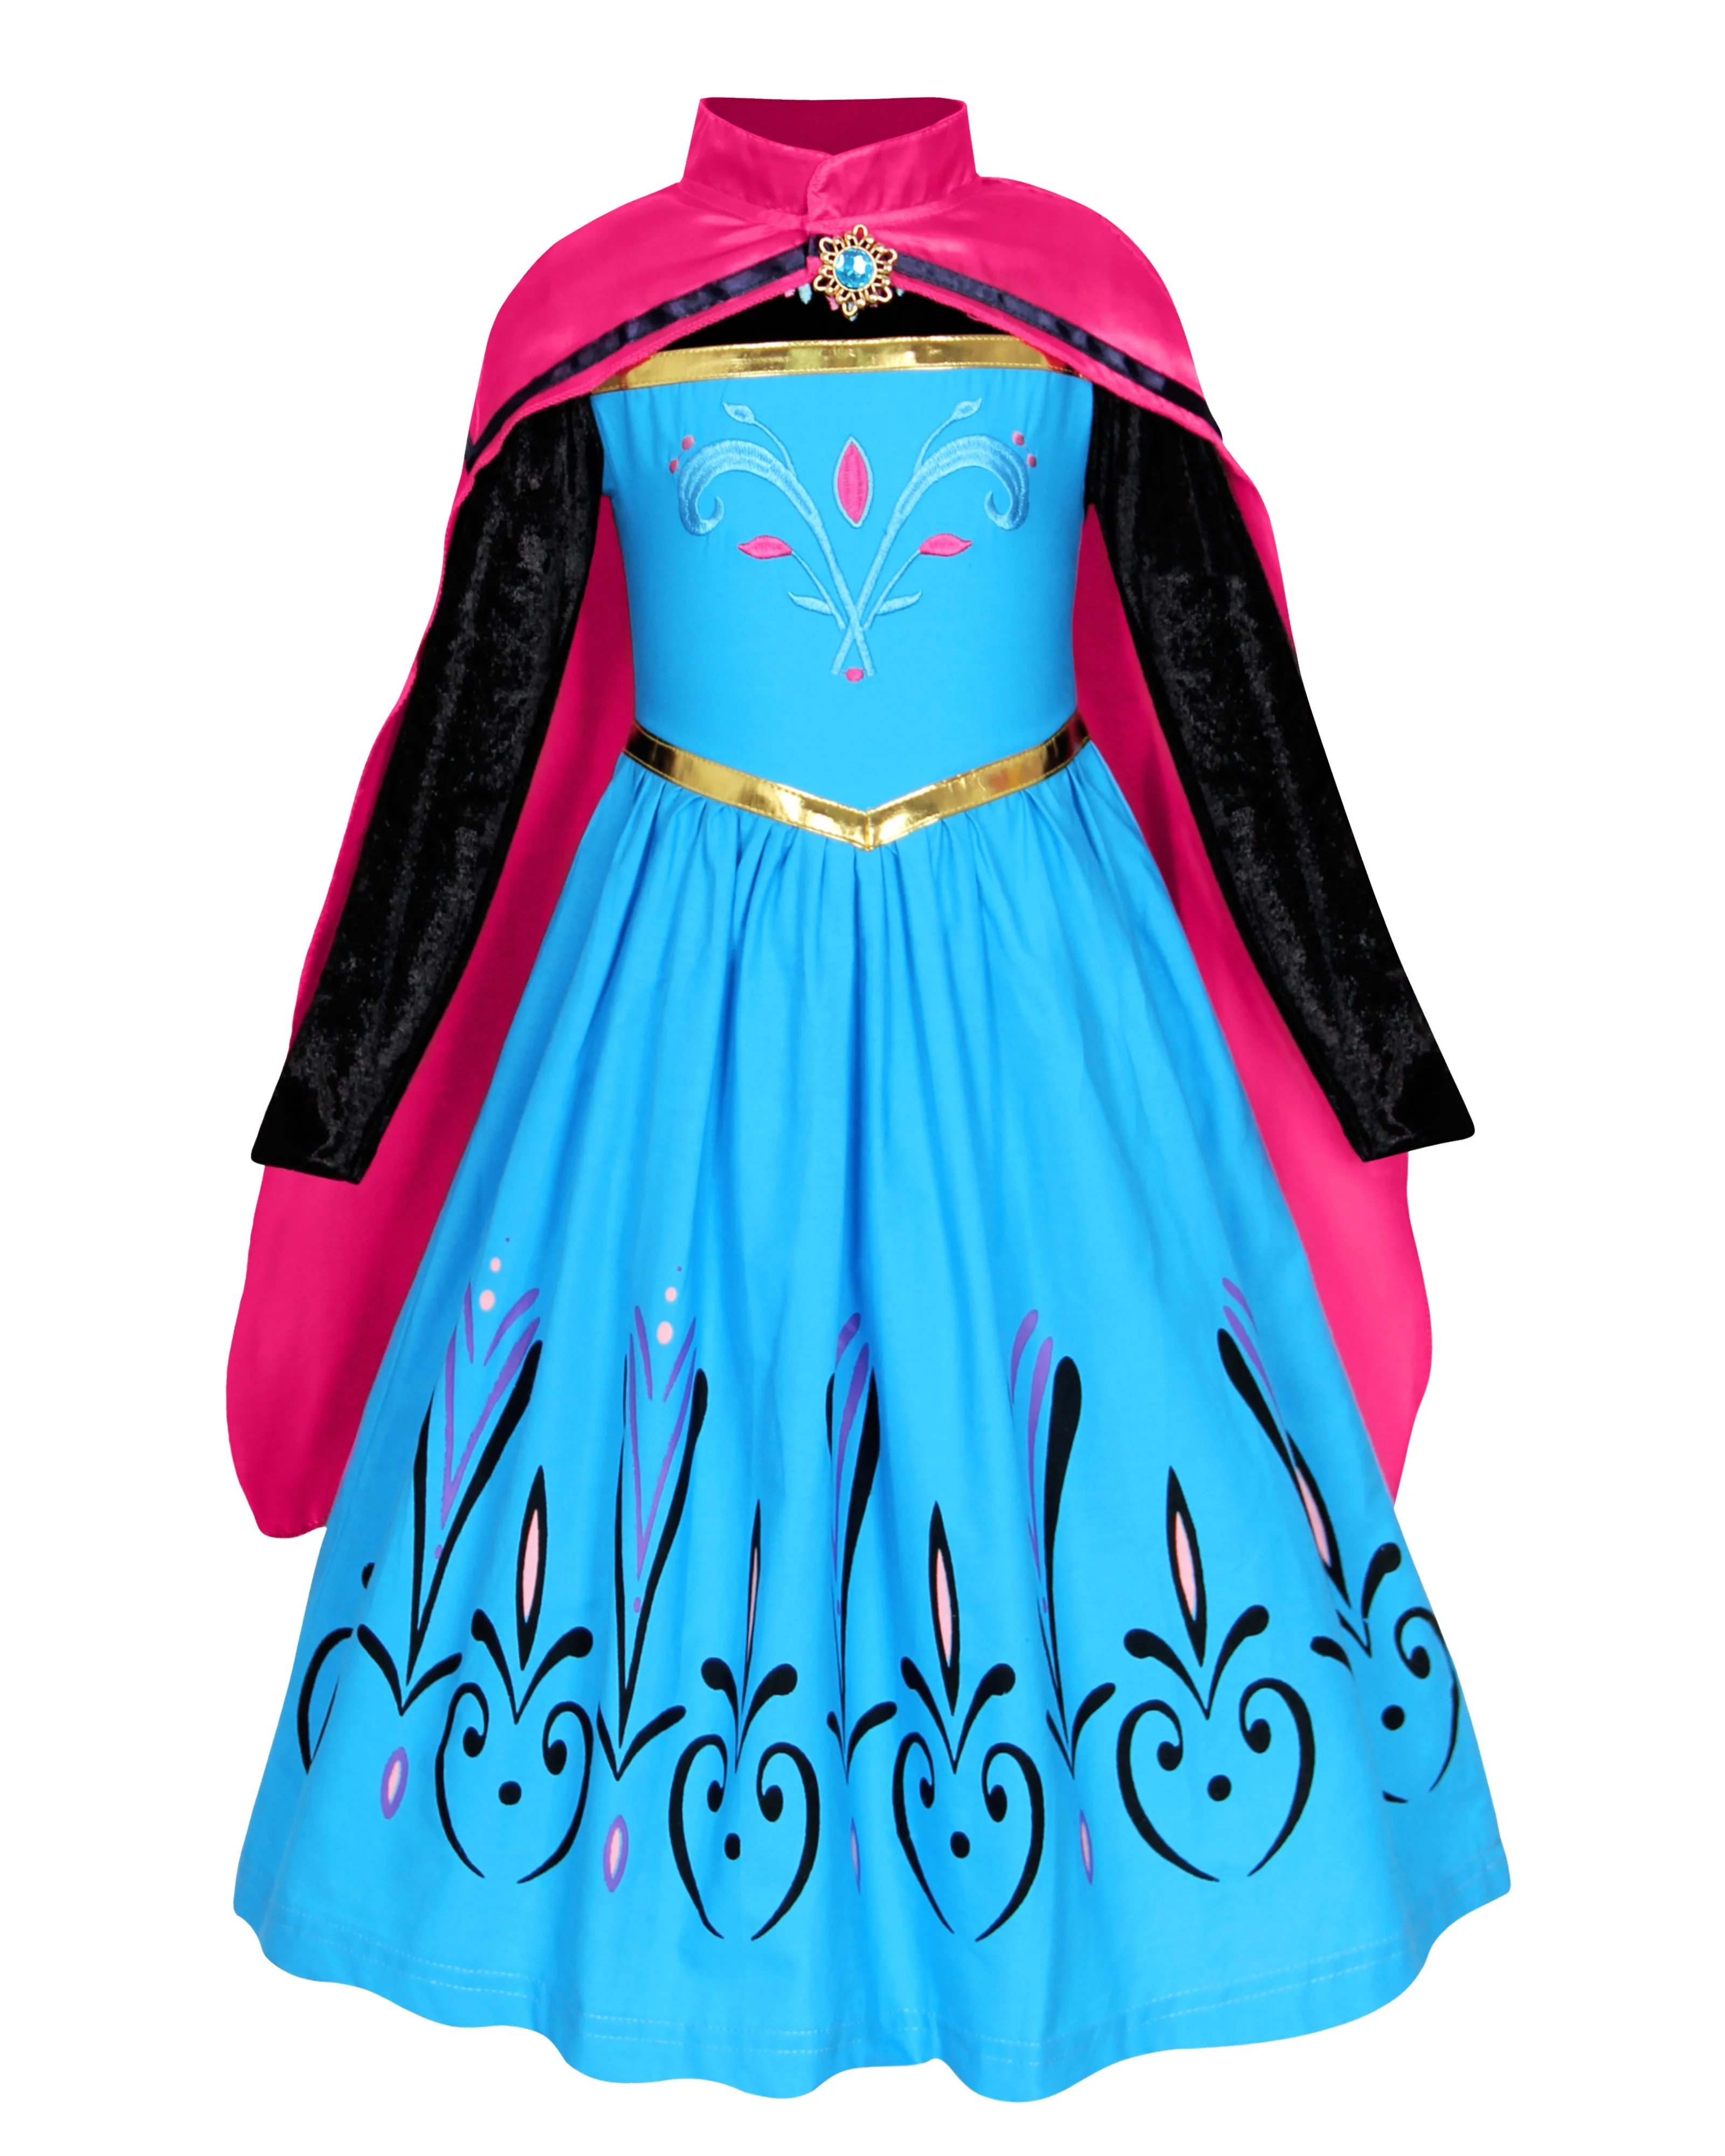 
Hot Sell Princess Anna Elsa Costume Fancy Party Cosplay Role Play Dress 